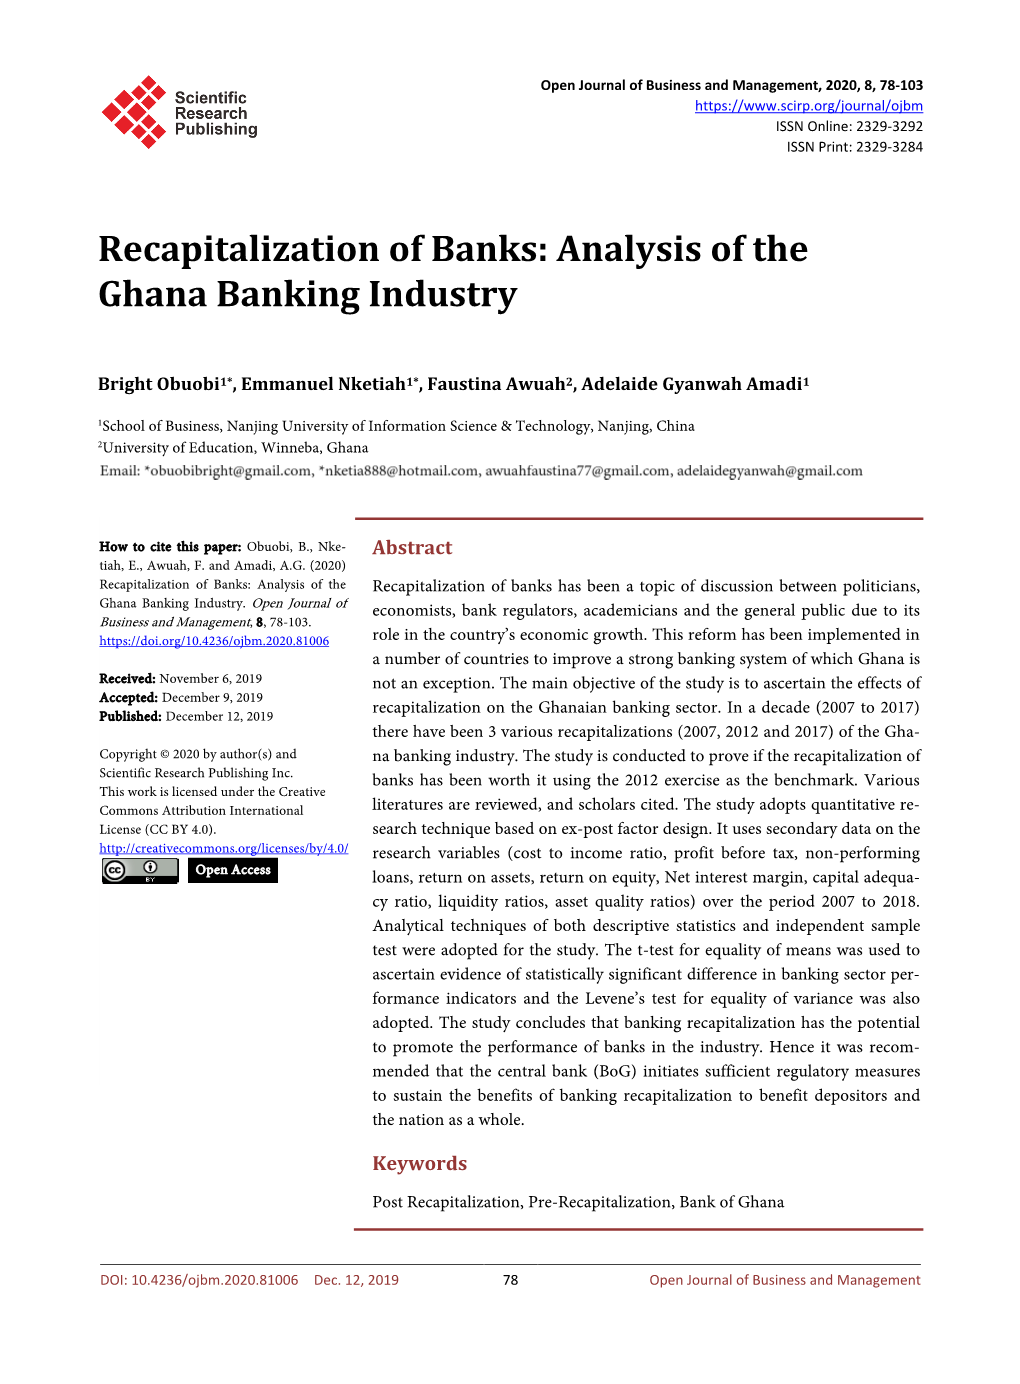 Recapitalization of Banks: Analysis of the Ghana Banking Industry